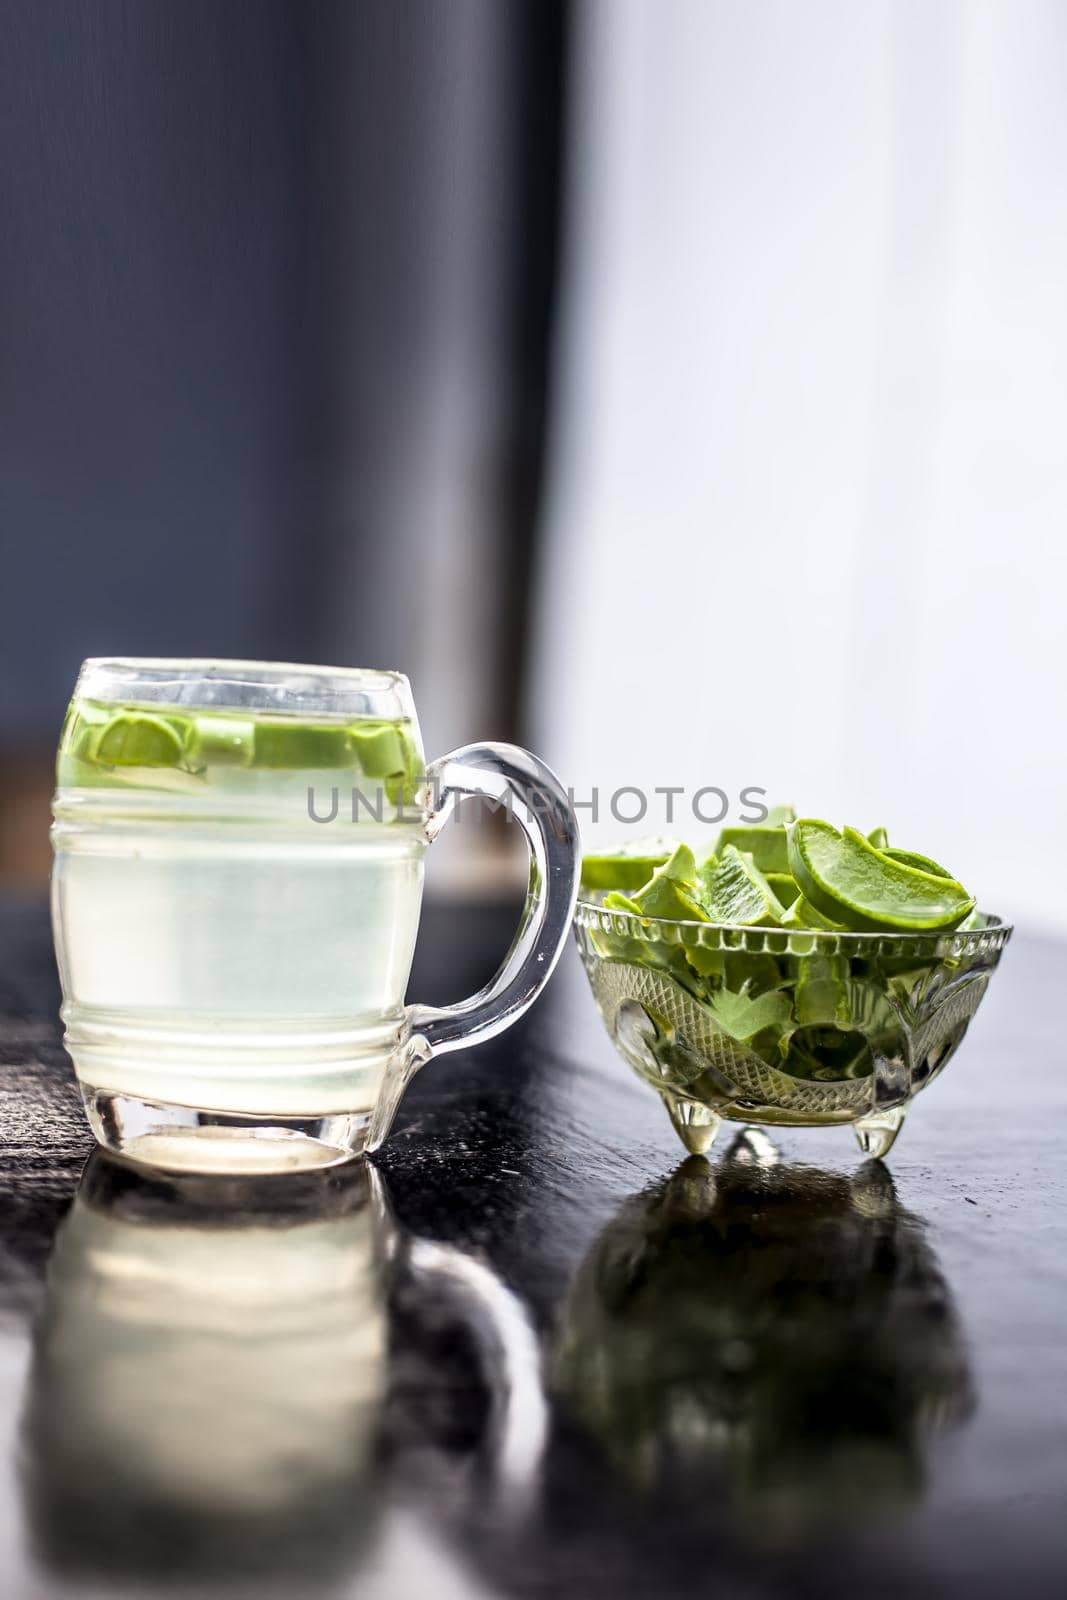 Close up of glass mug on wooden surface containing aloe vera detox drink in along with its entire raw ingredients with it. Vertical shot with blurred background.